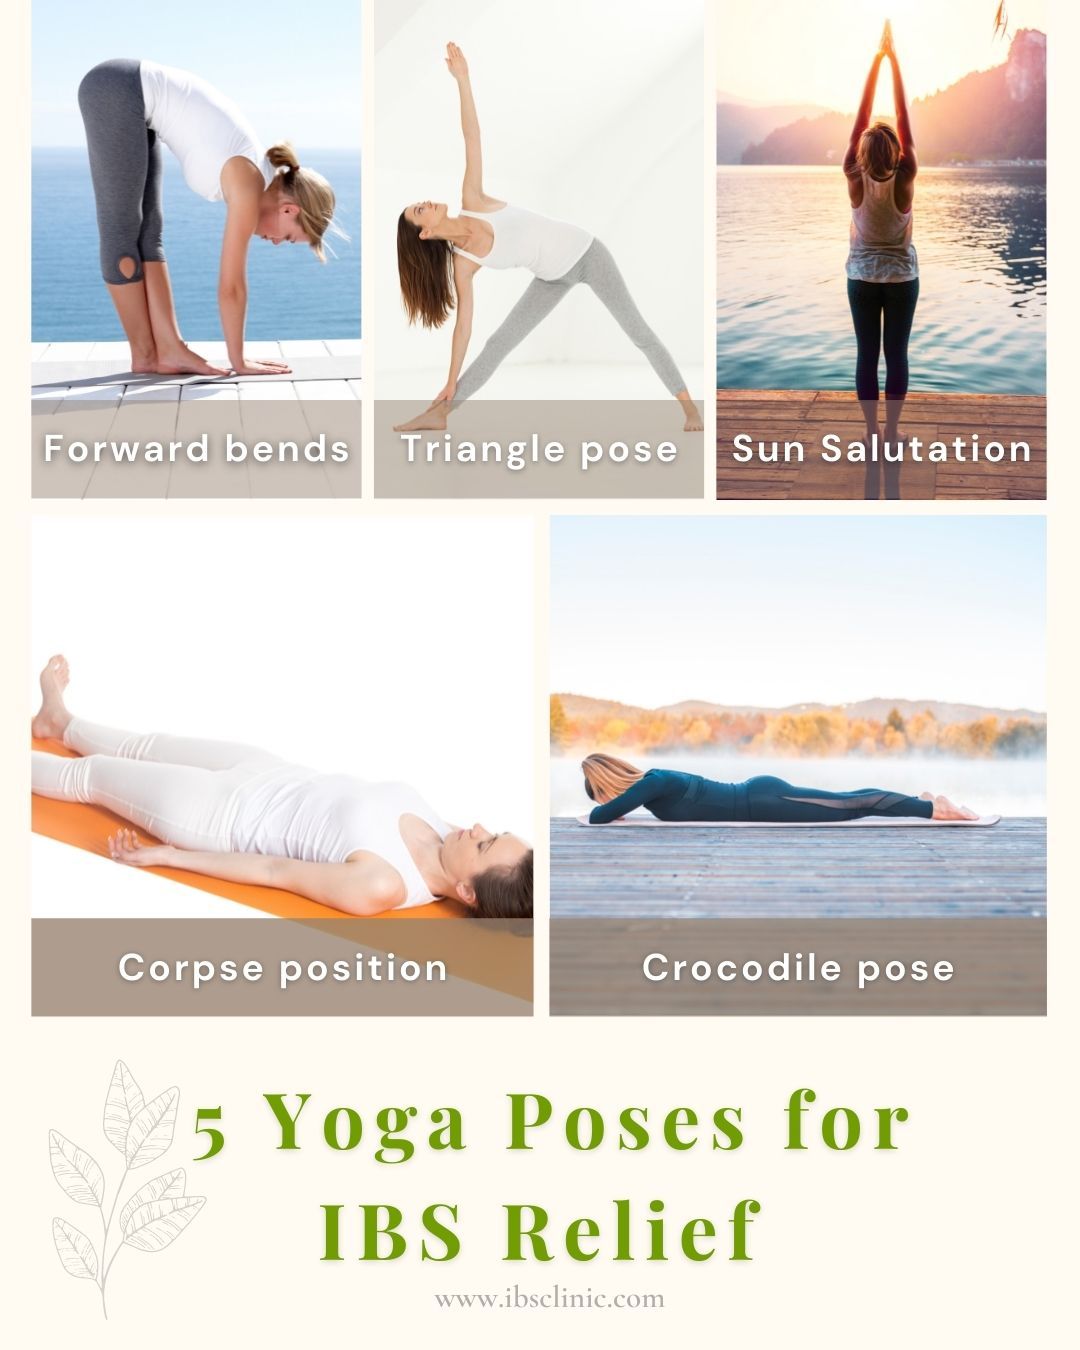 4 Yoga Poses to Boost your Immunity